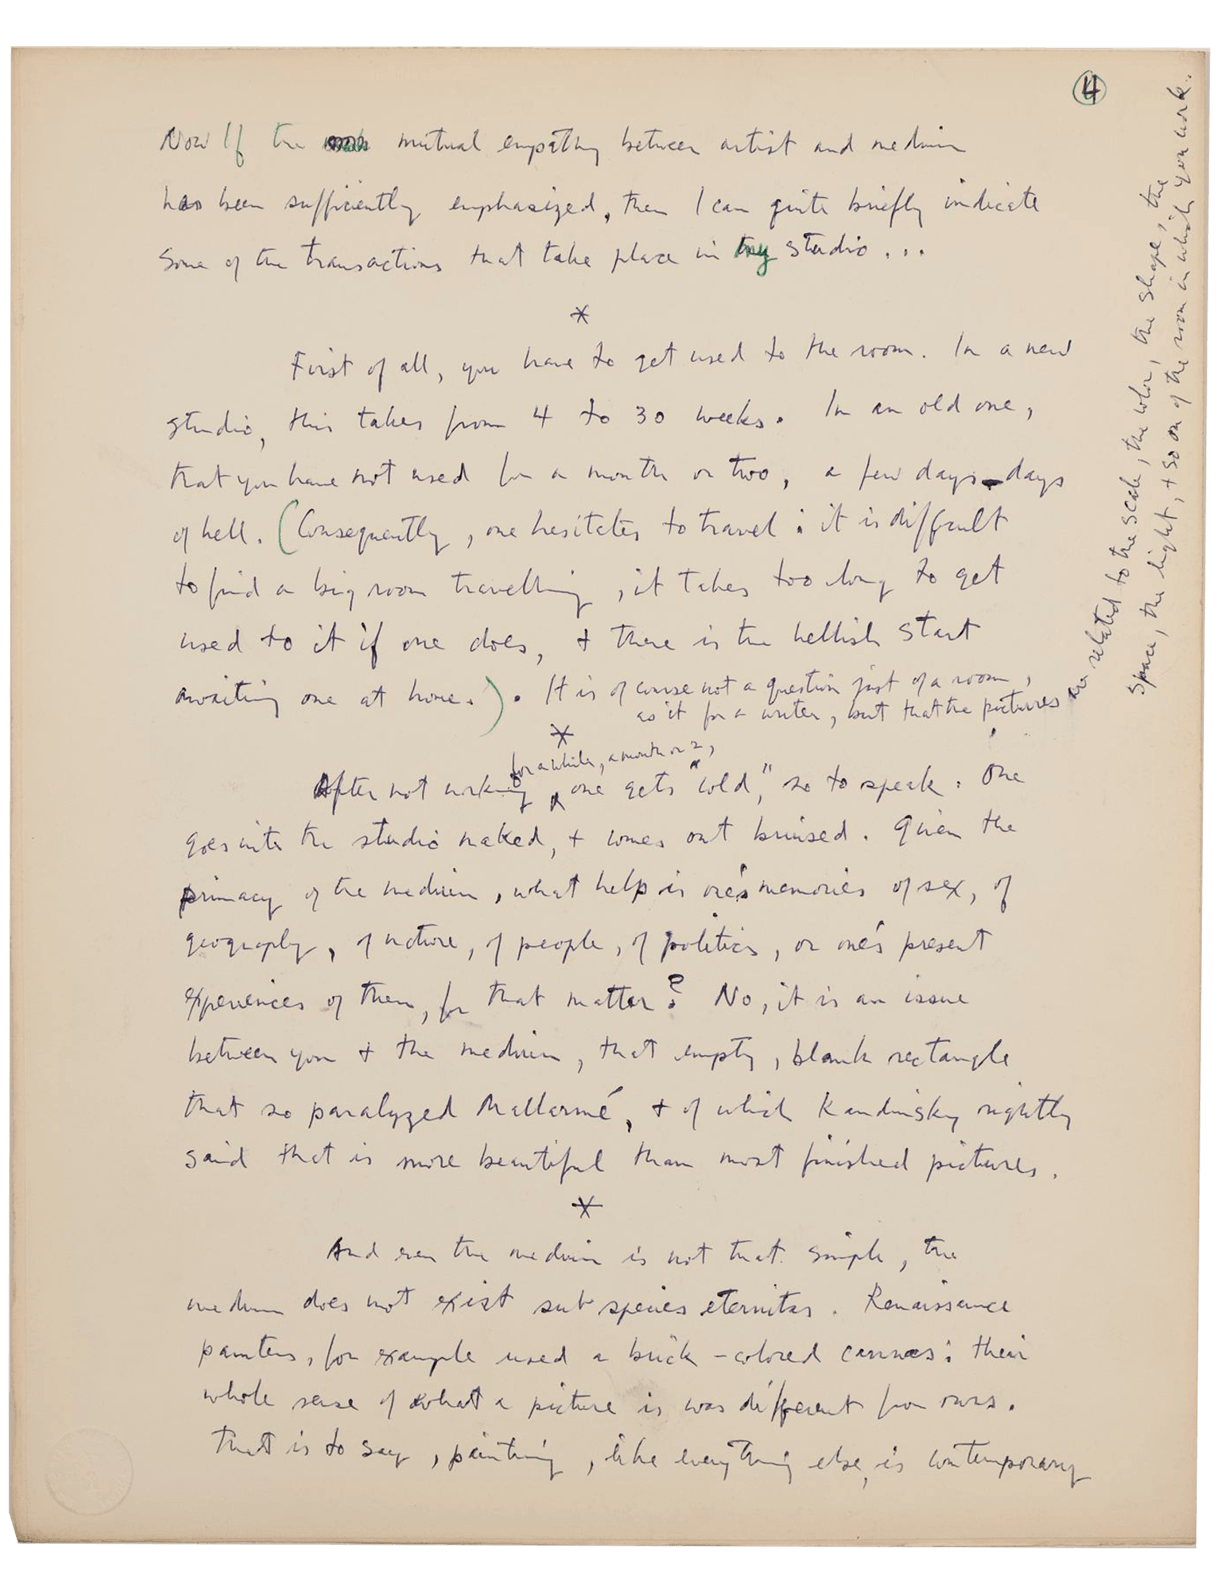 A page from Motherwell's draft of "A Process of Painting", 1963